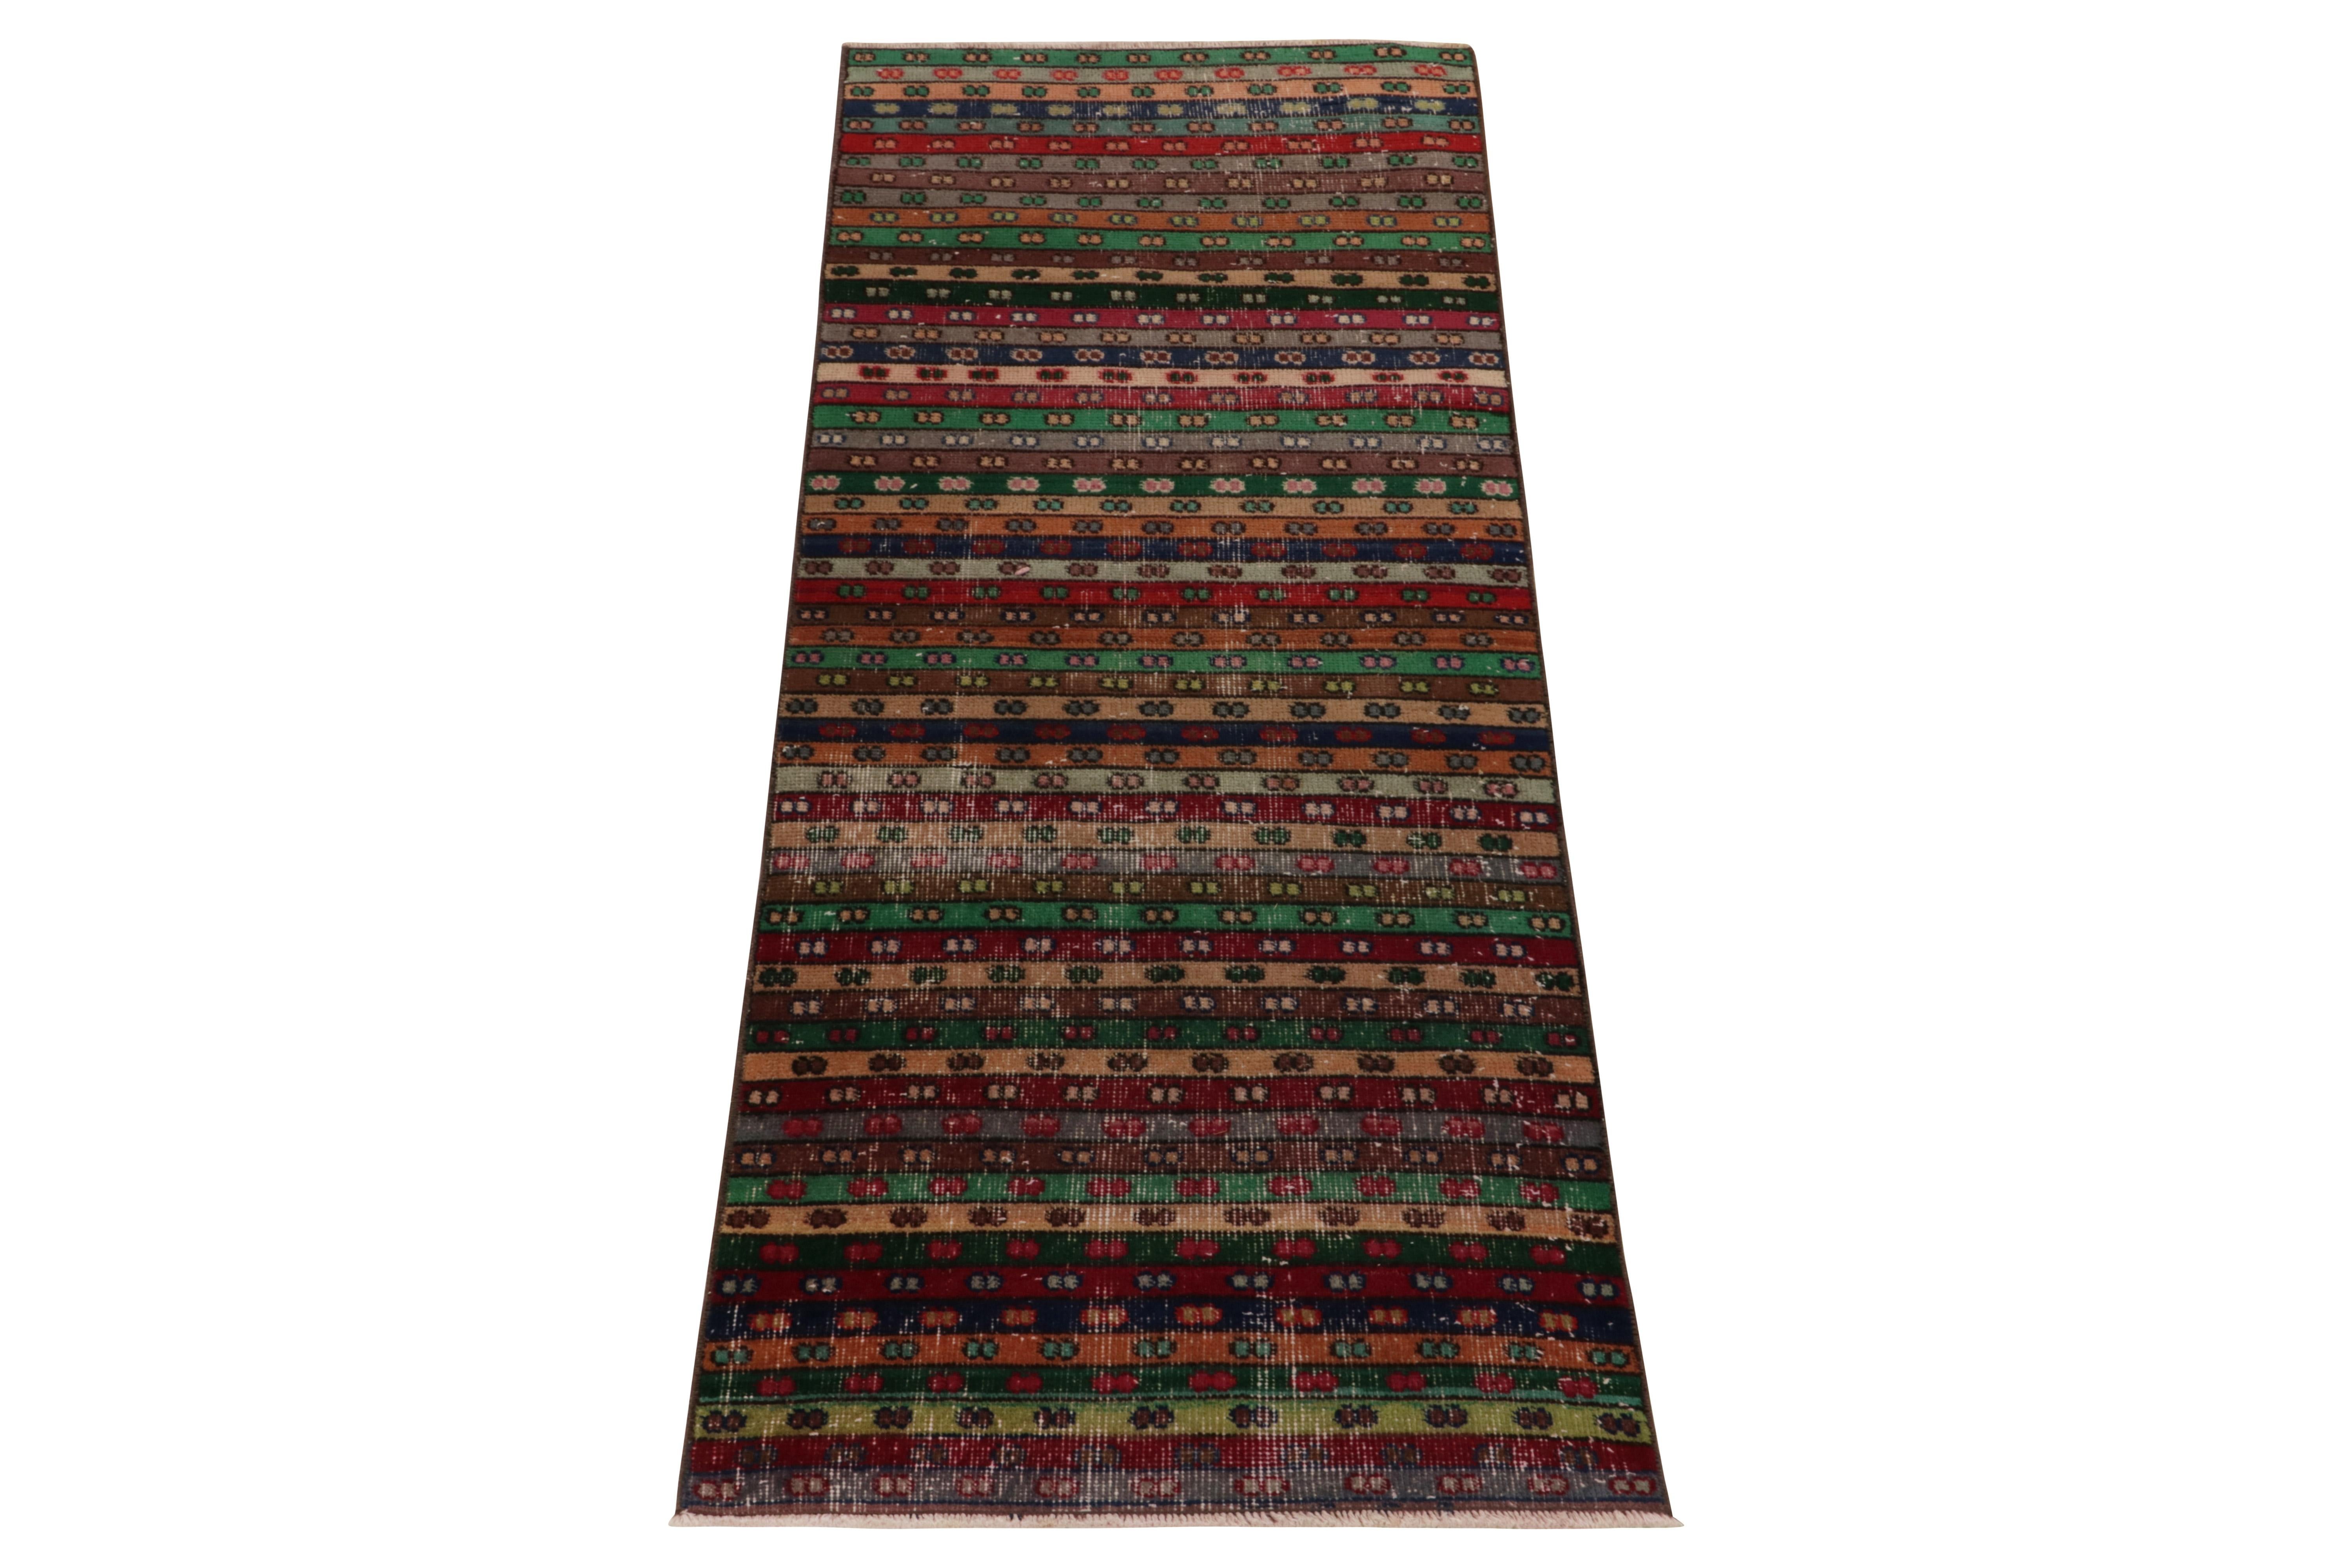 Hand-knotted in wool, a 2x6 vintage runner from a bold Turkish designer, commemorated in Rug & Kilim’s Mid-Century Pasha Collection. 

Featuring a repetitive geometric pattern in polychromatic stripes, the runner reads dextrous juxtaposition in